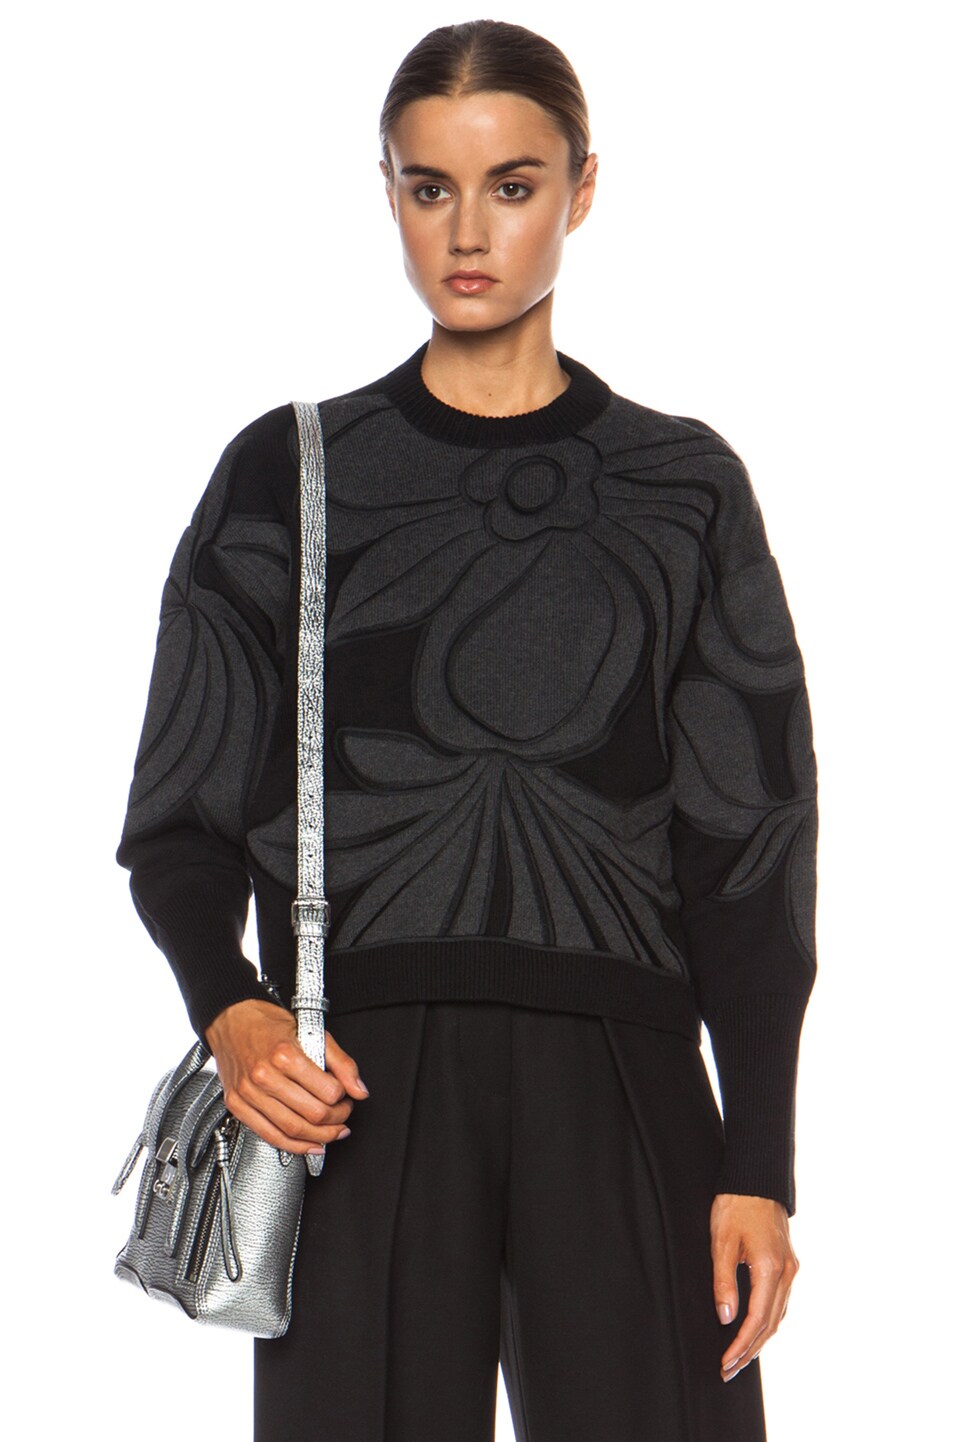 Image 1 of 3.1 phillip lim Floral Embroidery Cotton-Blend Sweater in Black & Charcoal